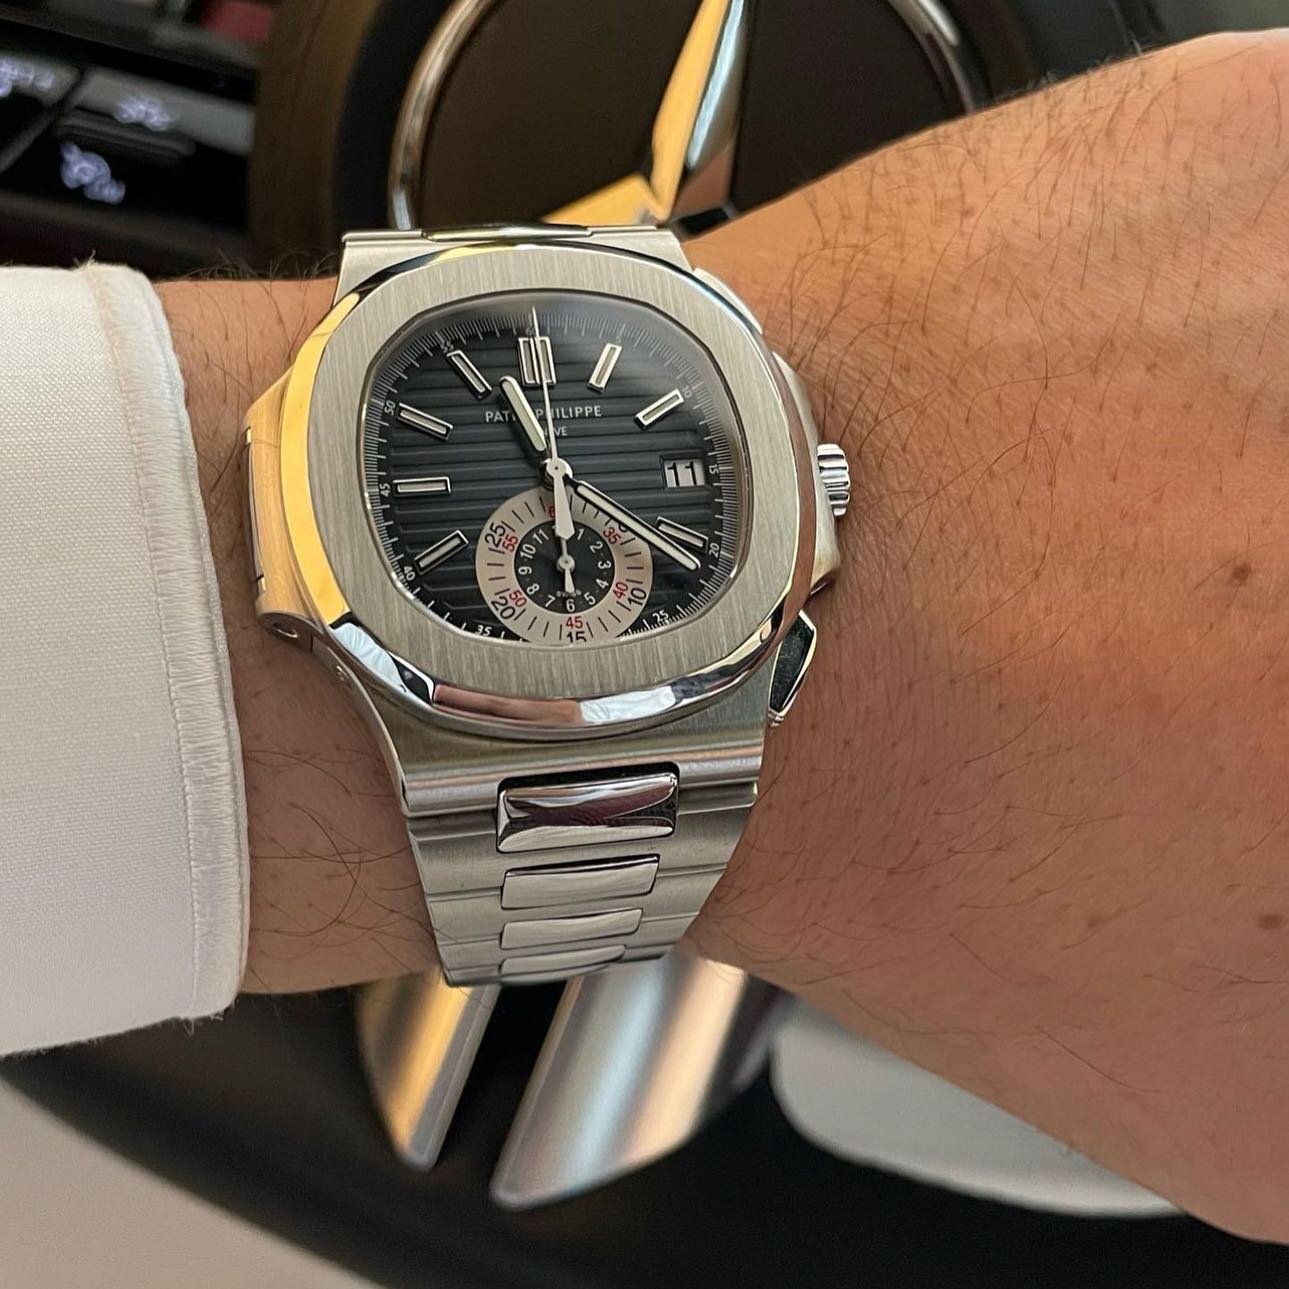 No wrist left behind! Let us source your next Rolex, Patek, Audemars, Richard Mille or any other timepiece you&rsquo;re in search of.